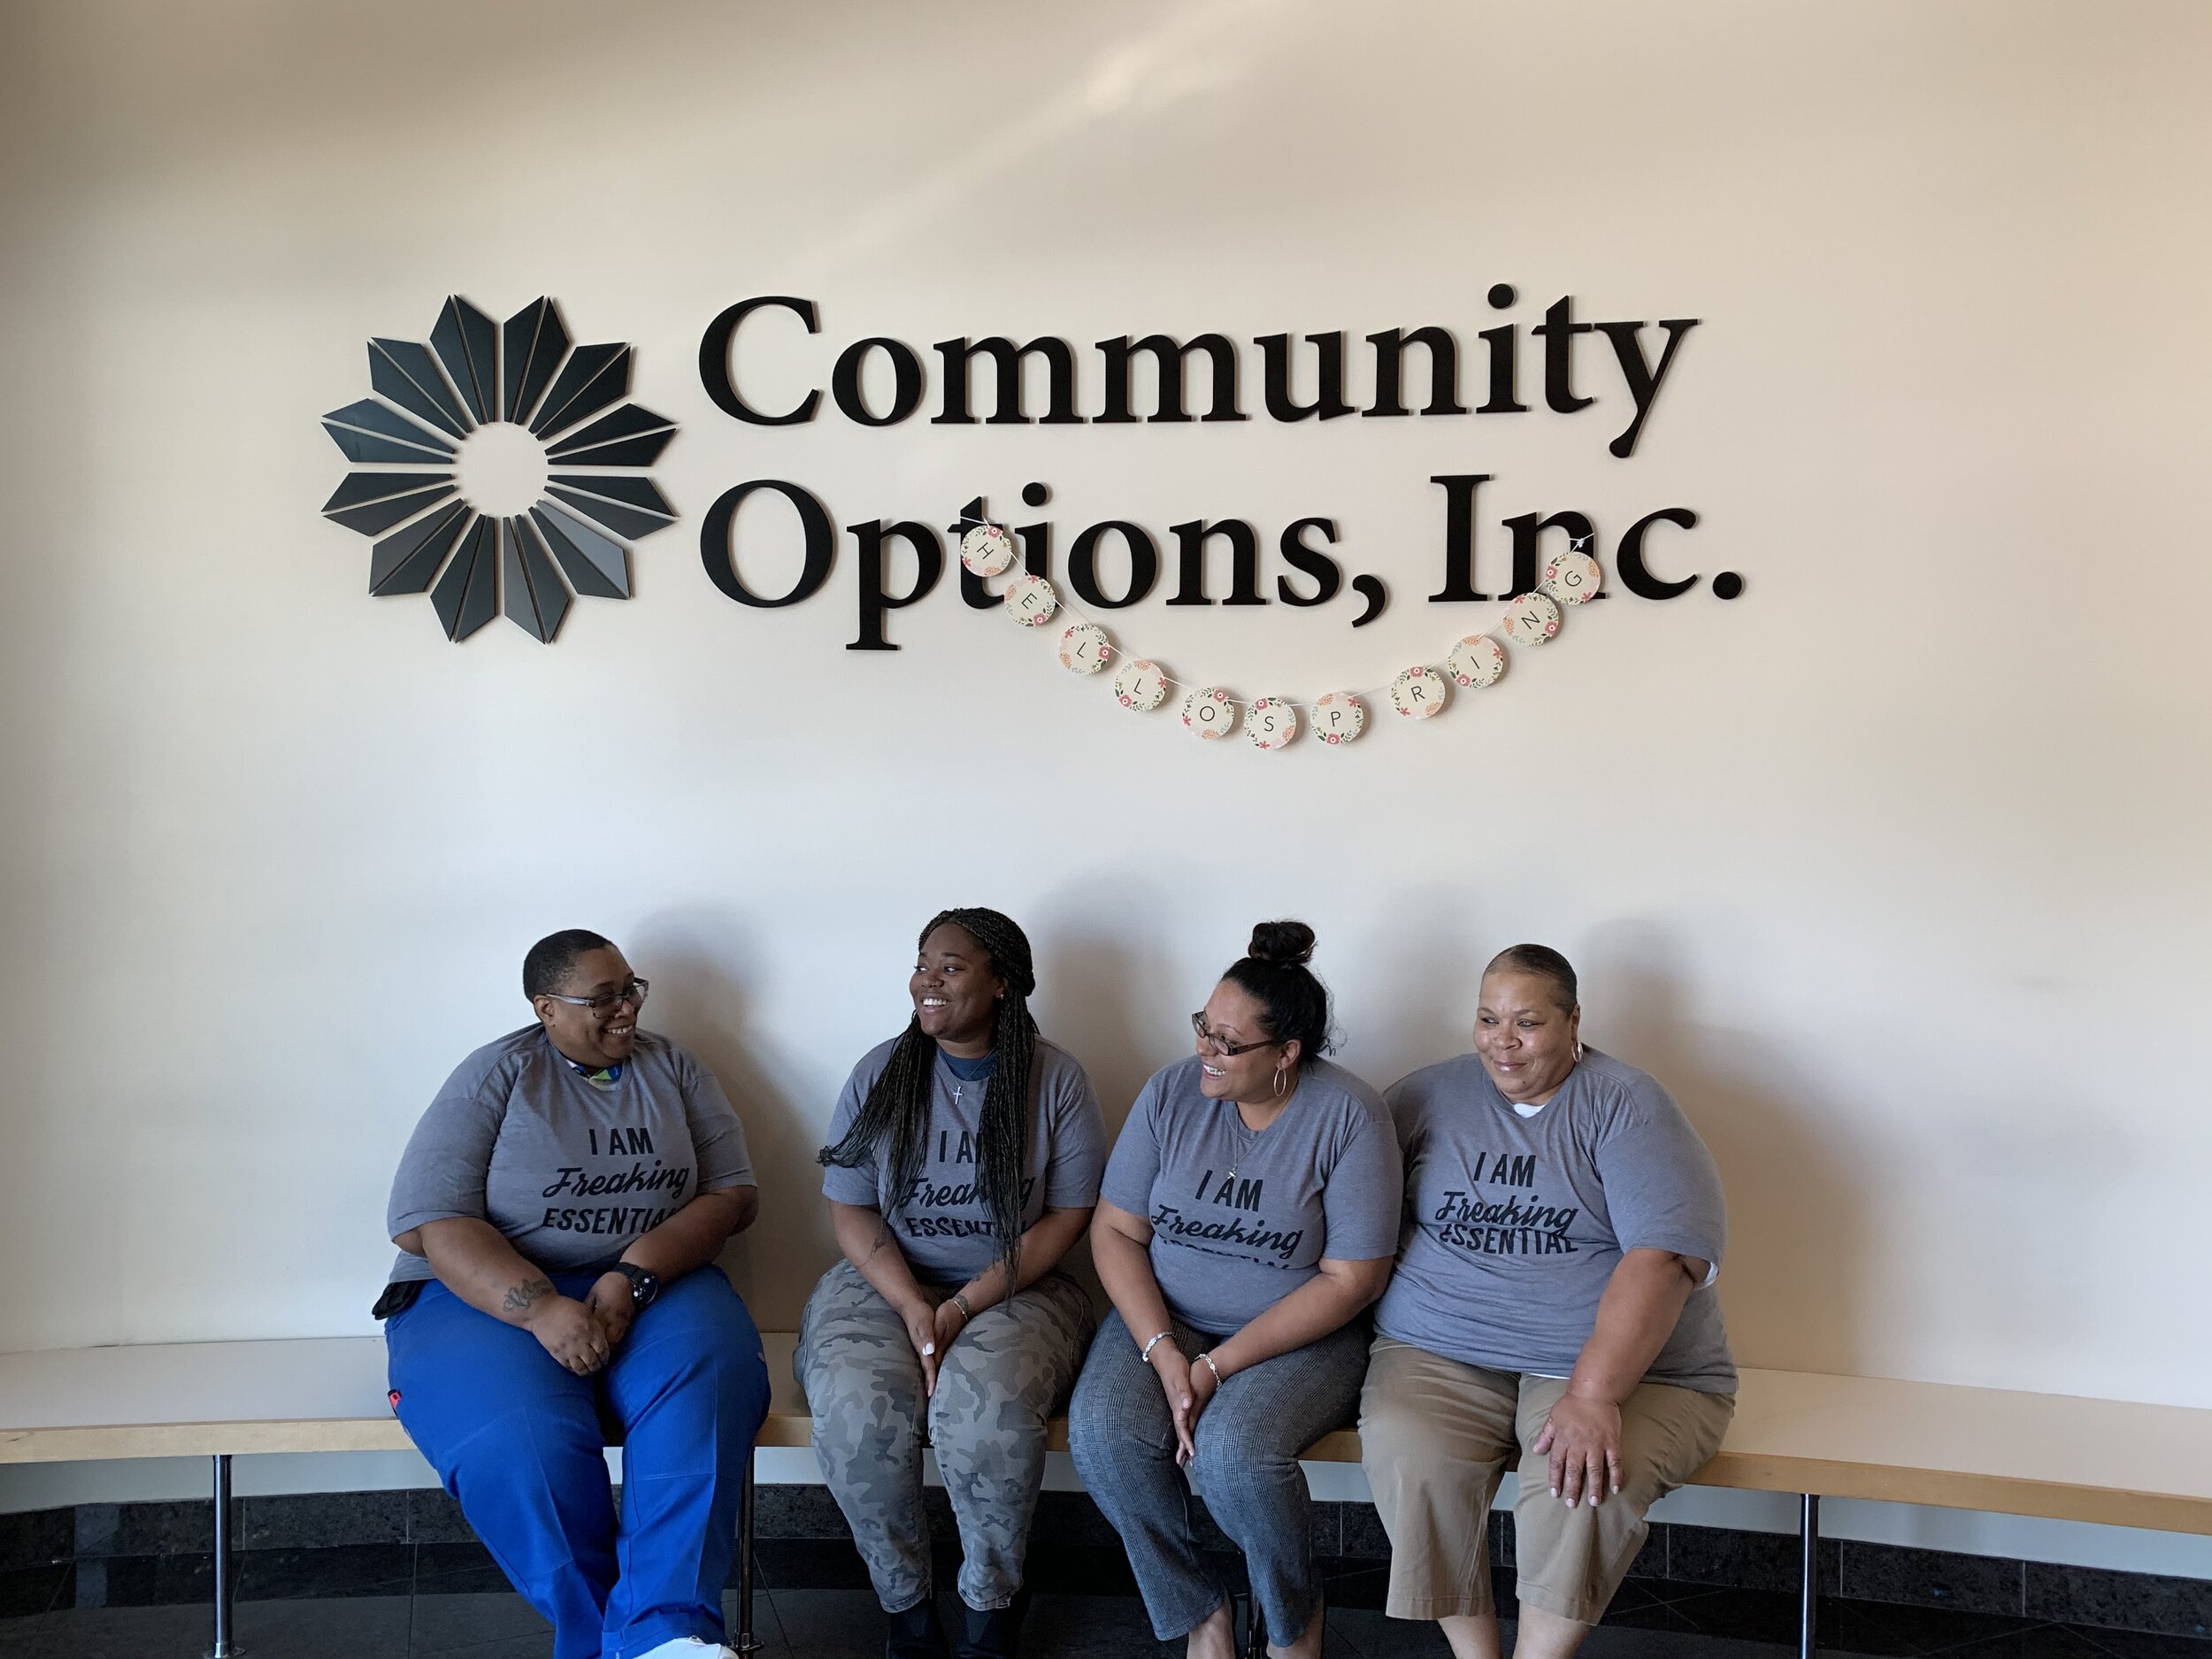 Essential personnel at Community Options, Inc. continue to provide daily service to their clients.